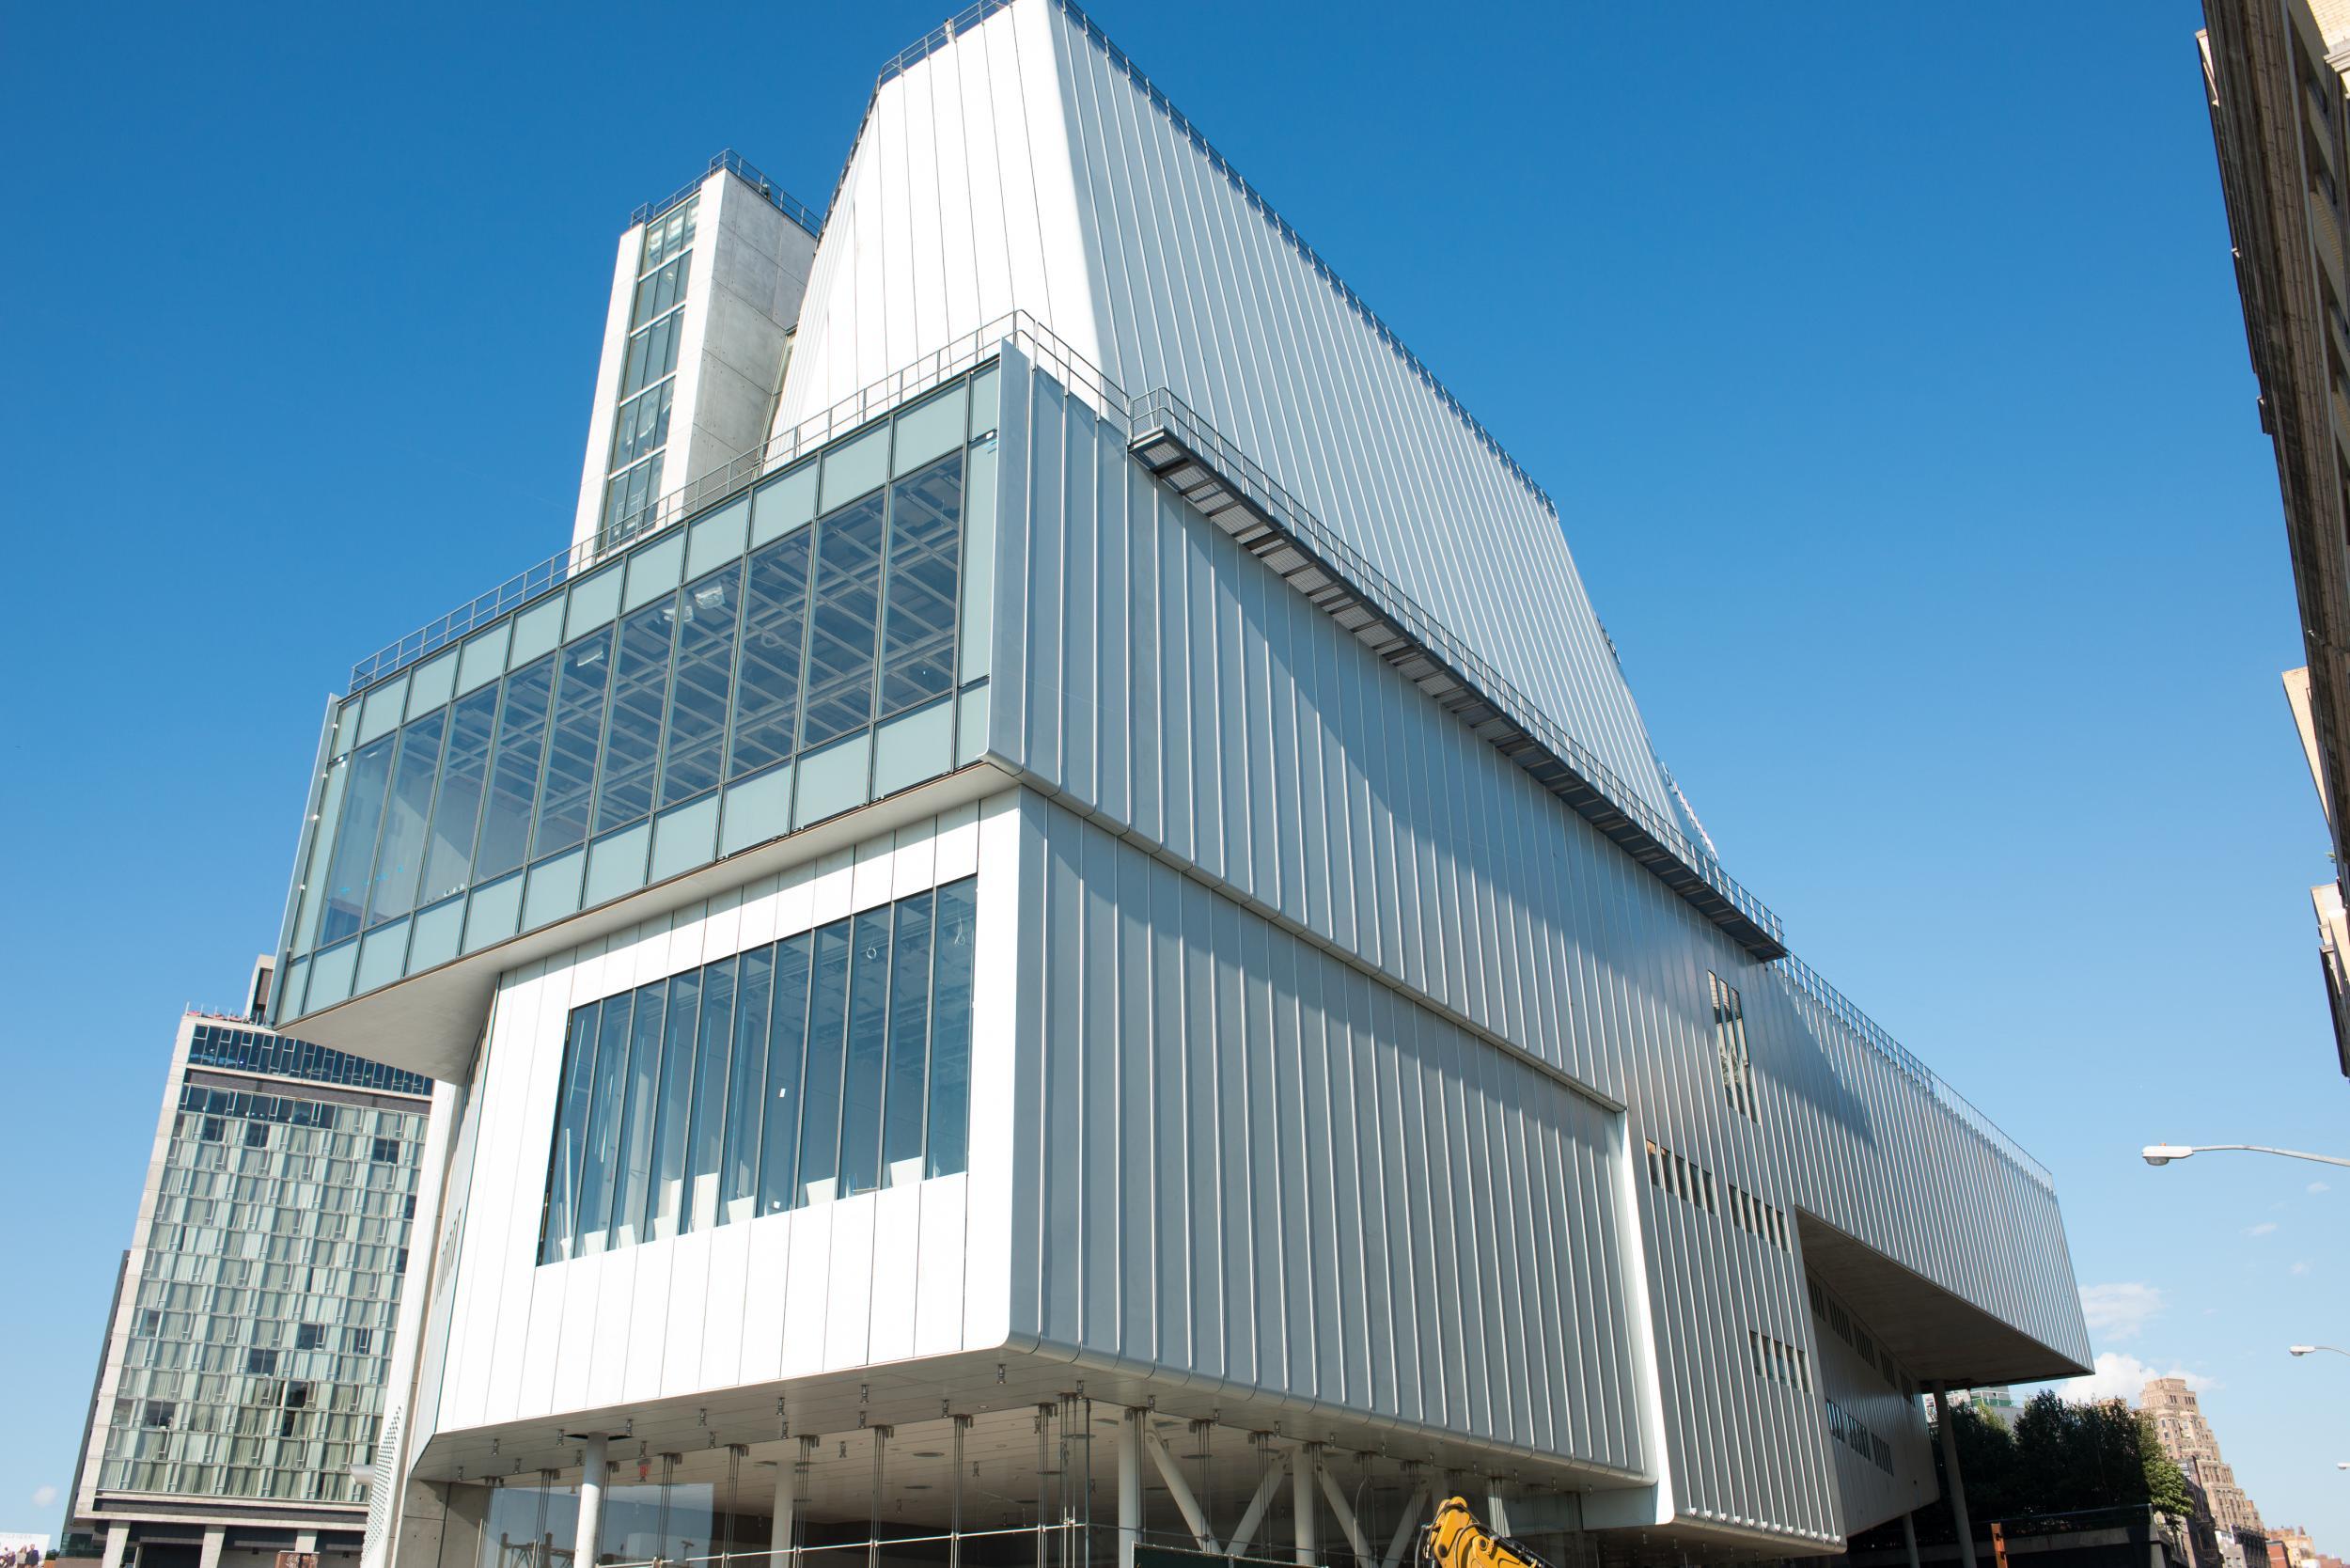 The new Whitney Museum in the Meatpacking District